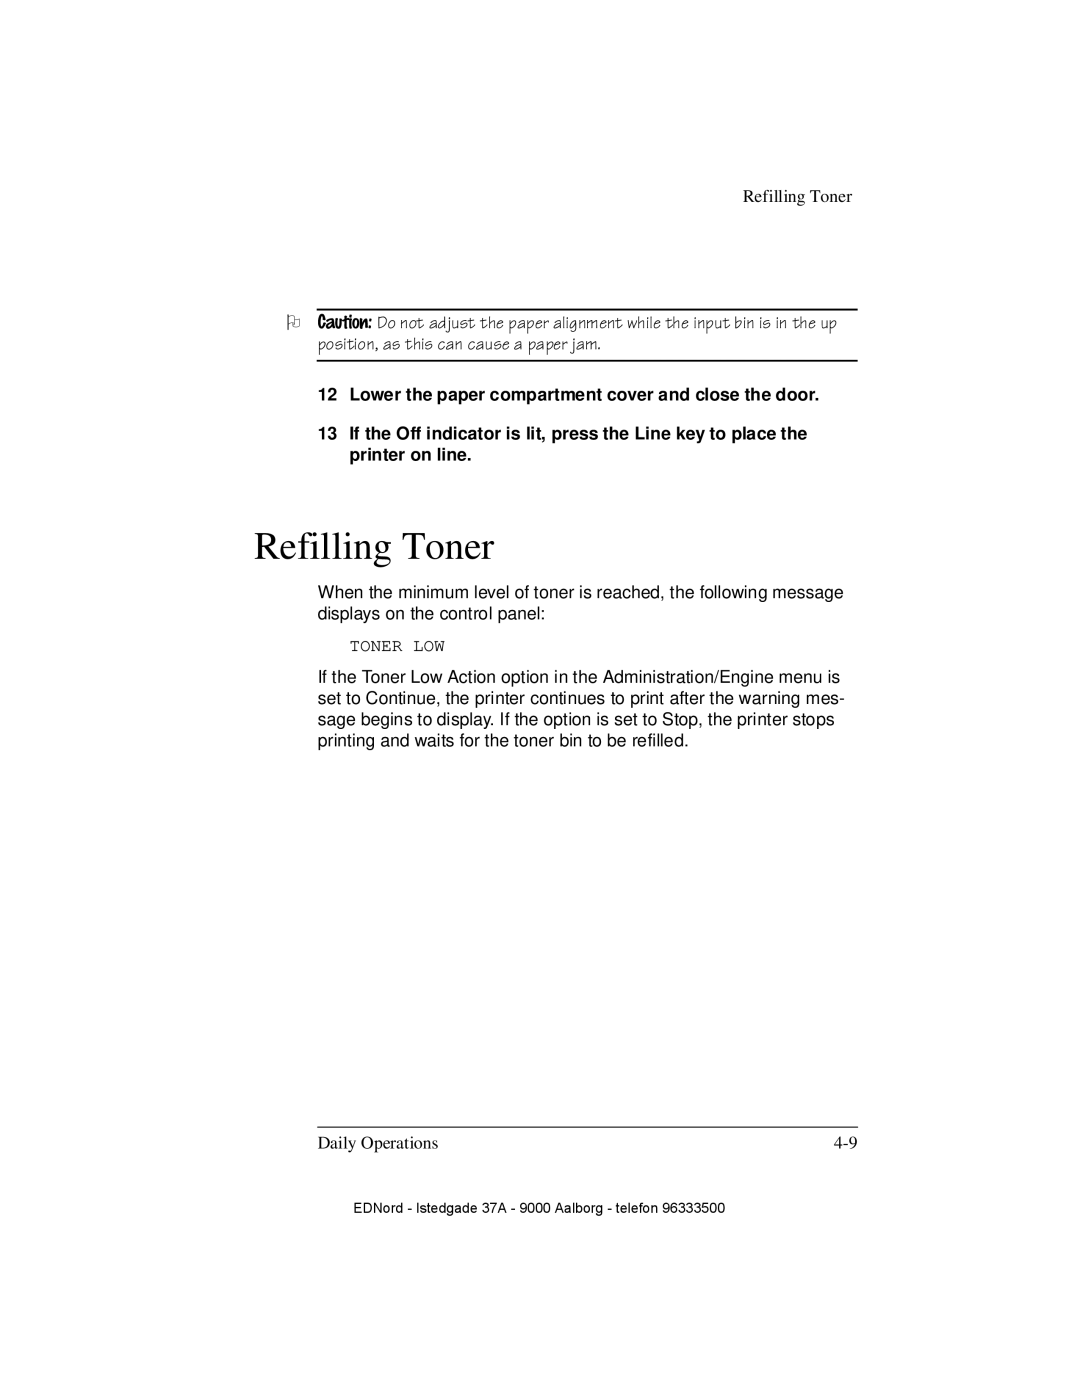 IBM QMS 4525 manual Refilling Toner, Lower the paper compartment cover and close the door 